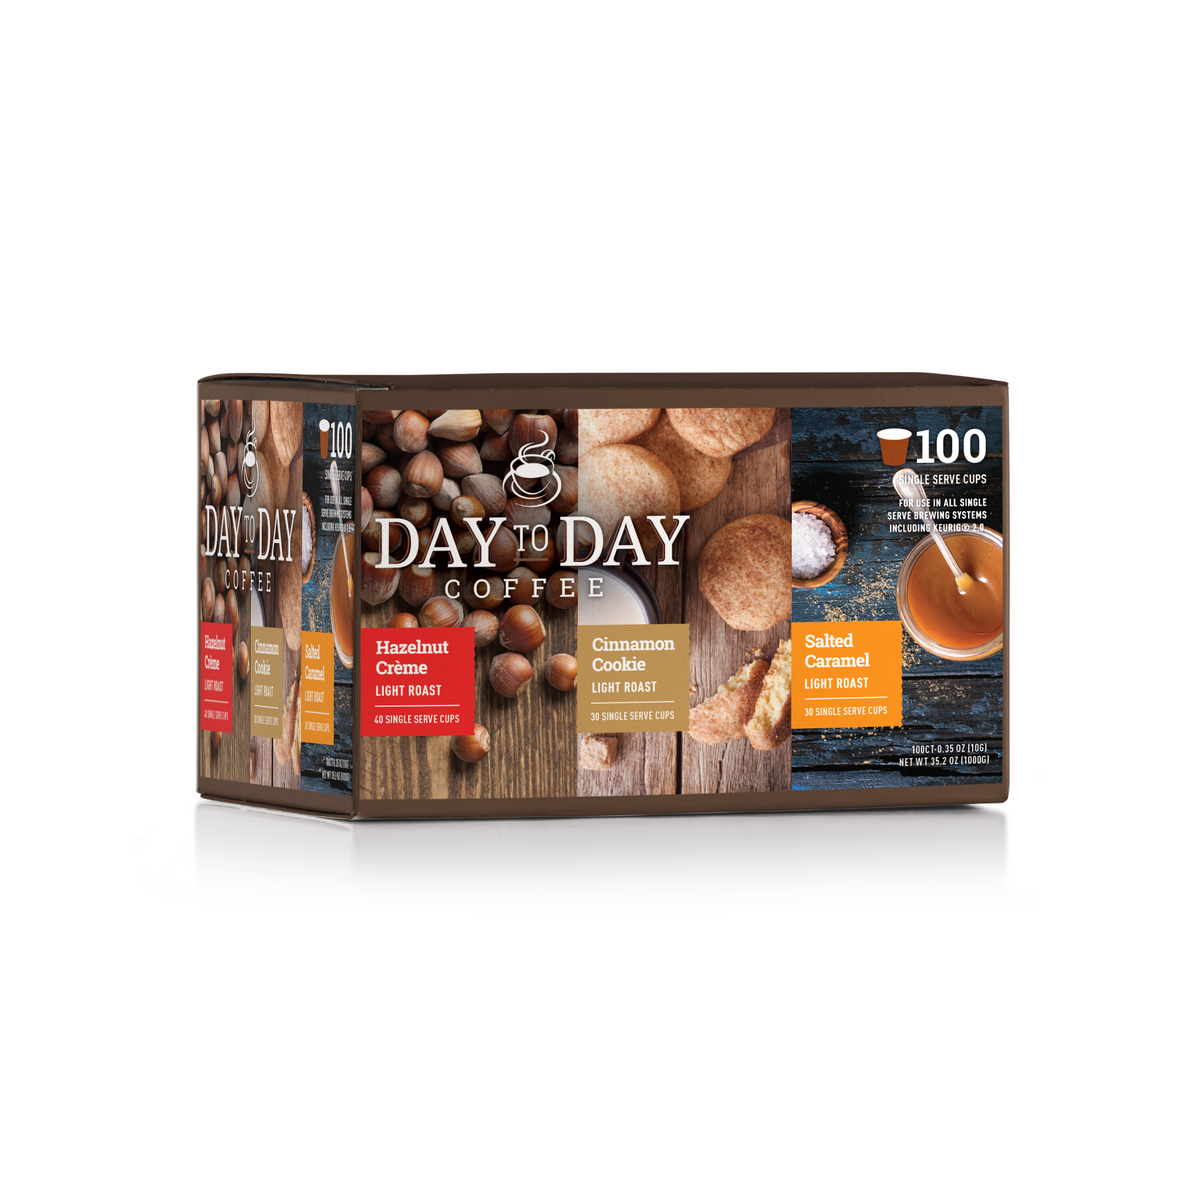 Day to day coffee 100 count variety flavored pack coffee pods for single serve coffee brewer